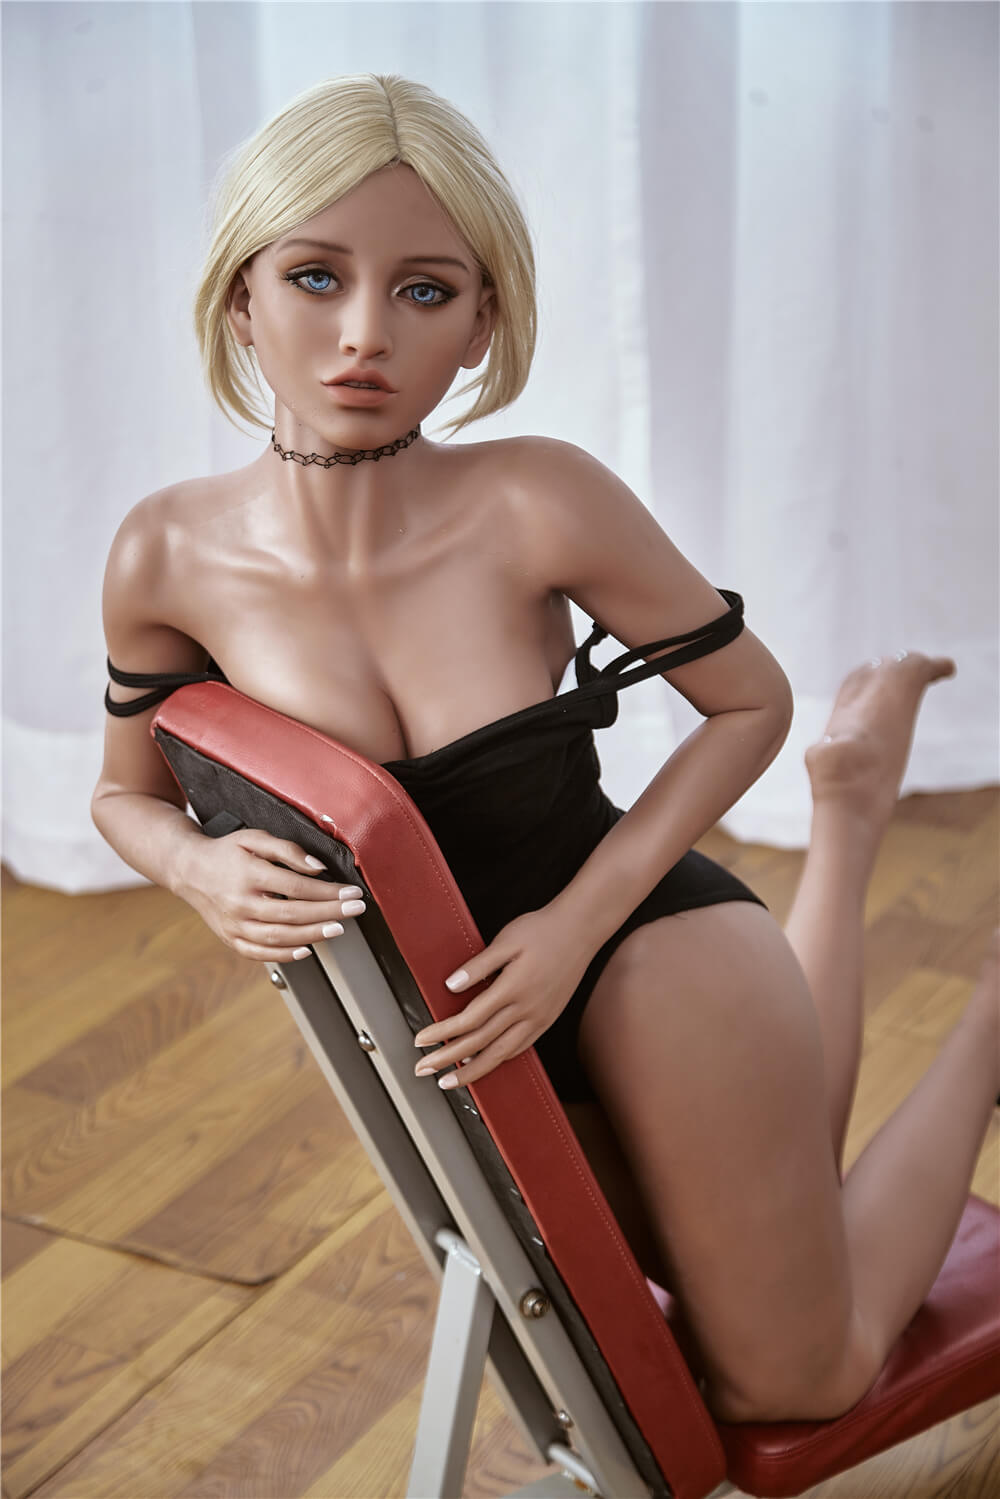 Irontech - TPE Sex Doll - 4ft 11in (150cm) - Candace - Love Dolls 4U